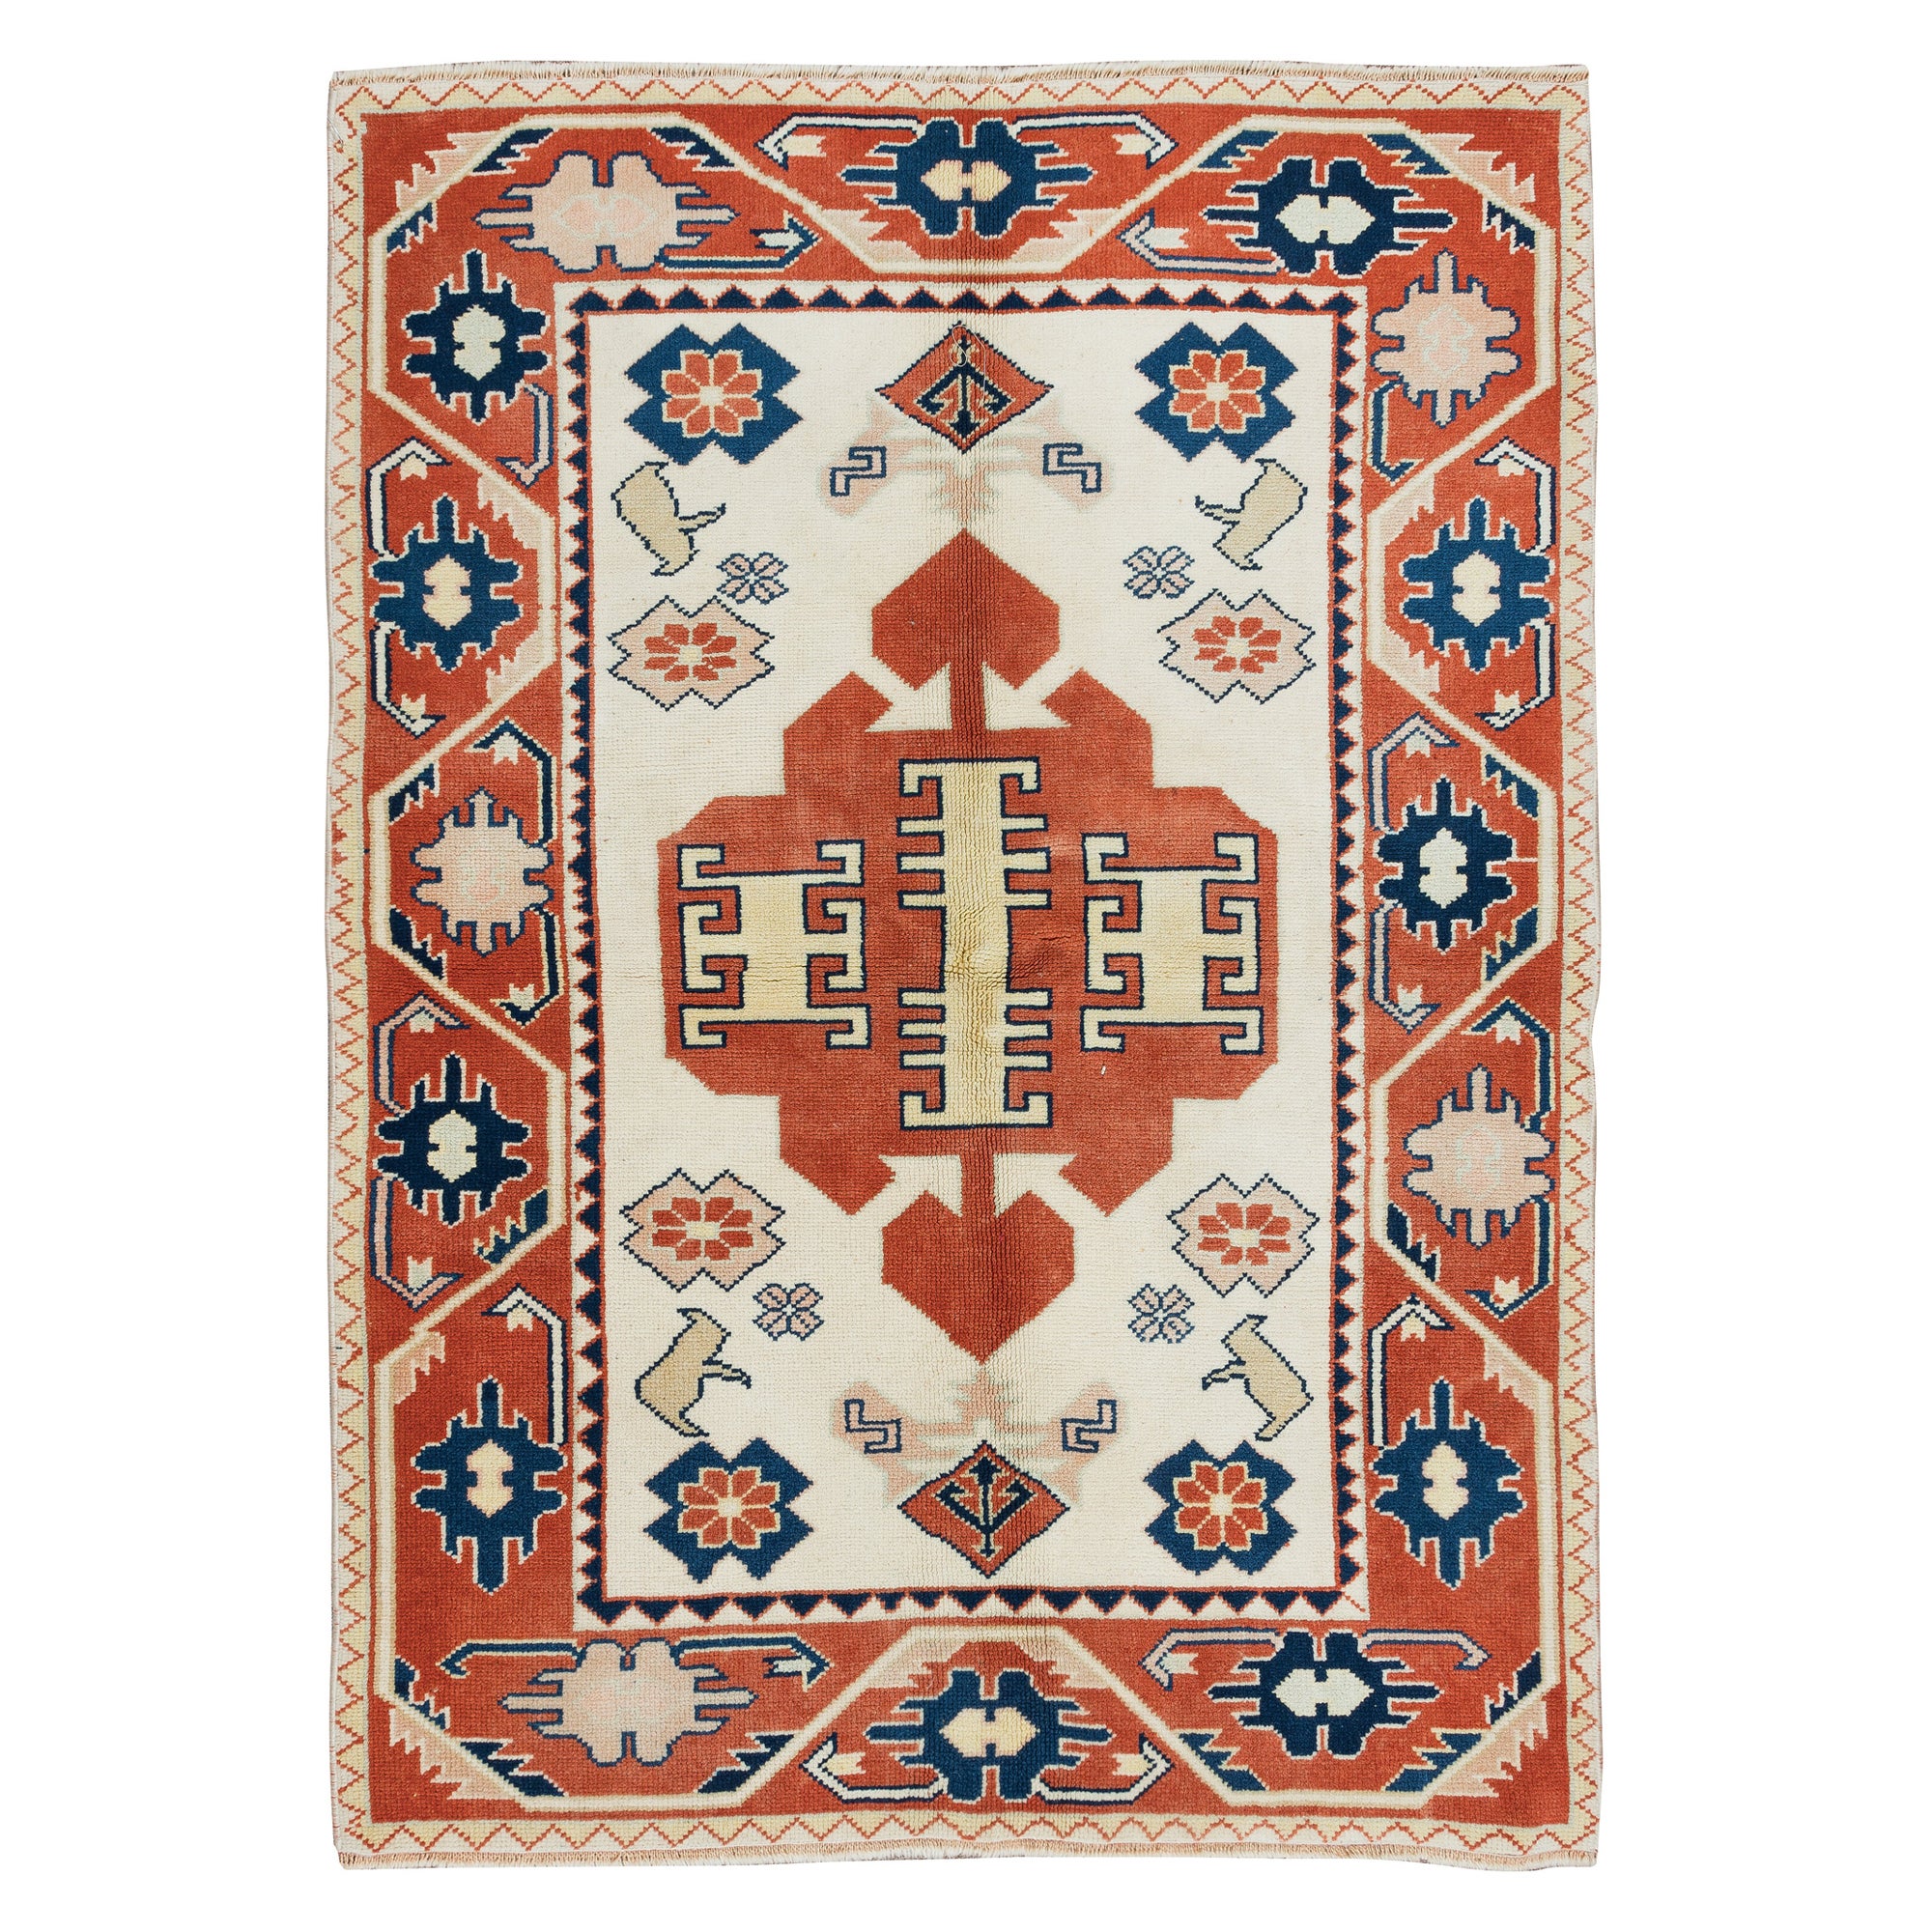 4x5.6 Ft Vintage Handmade Geometric Turkish Rug in Cream, Red and Blue Colors For Sale